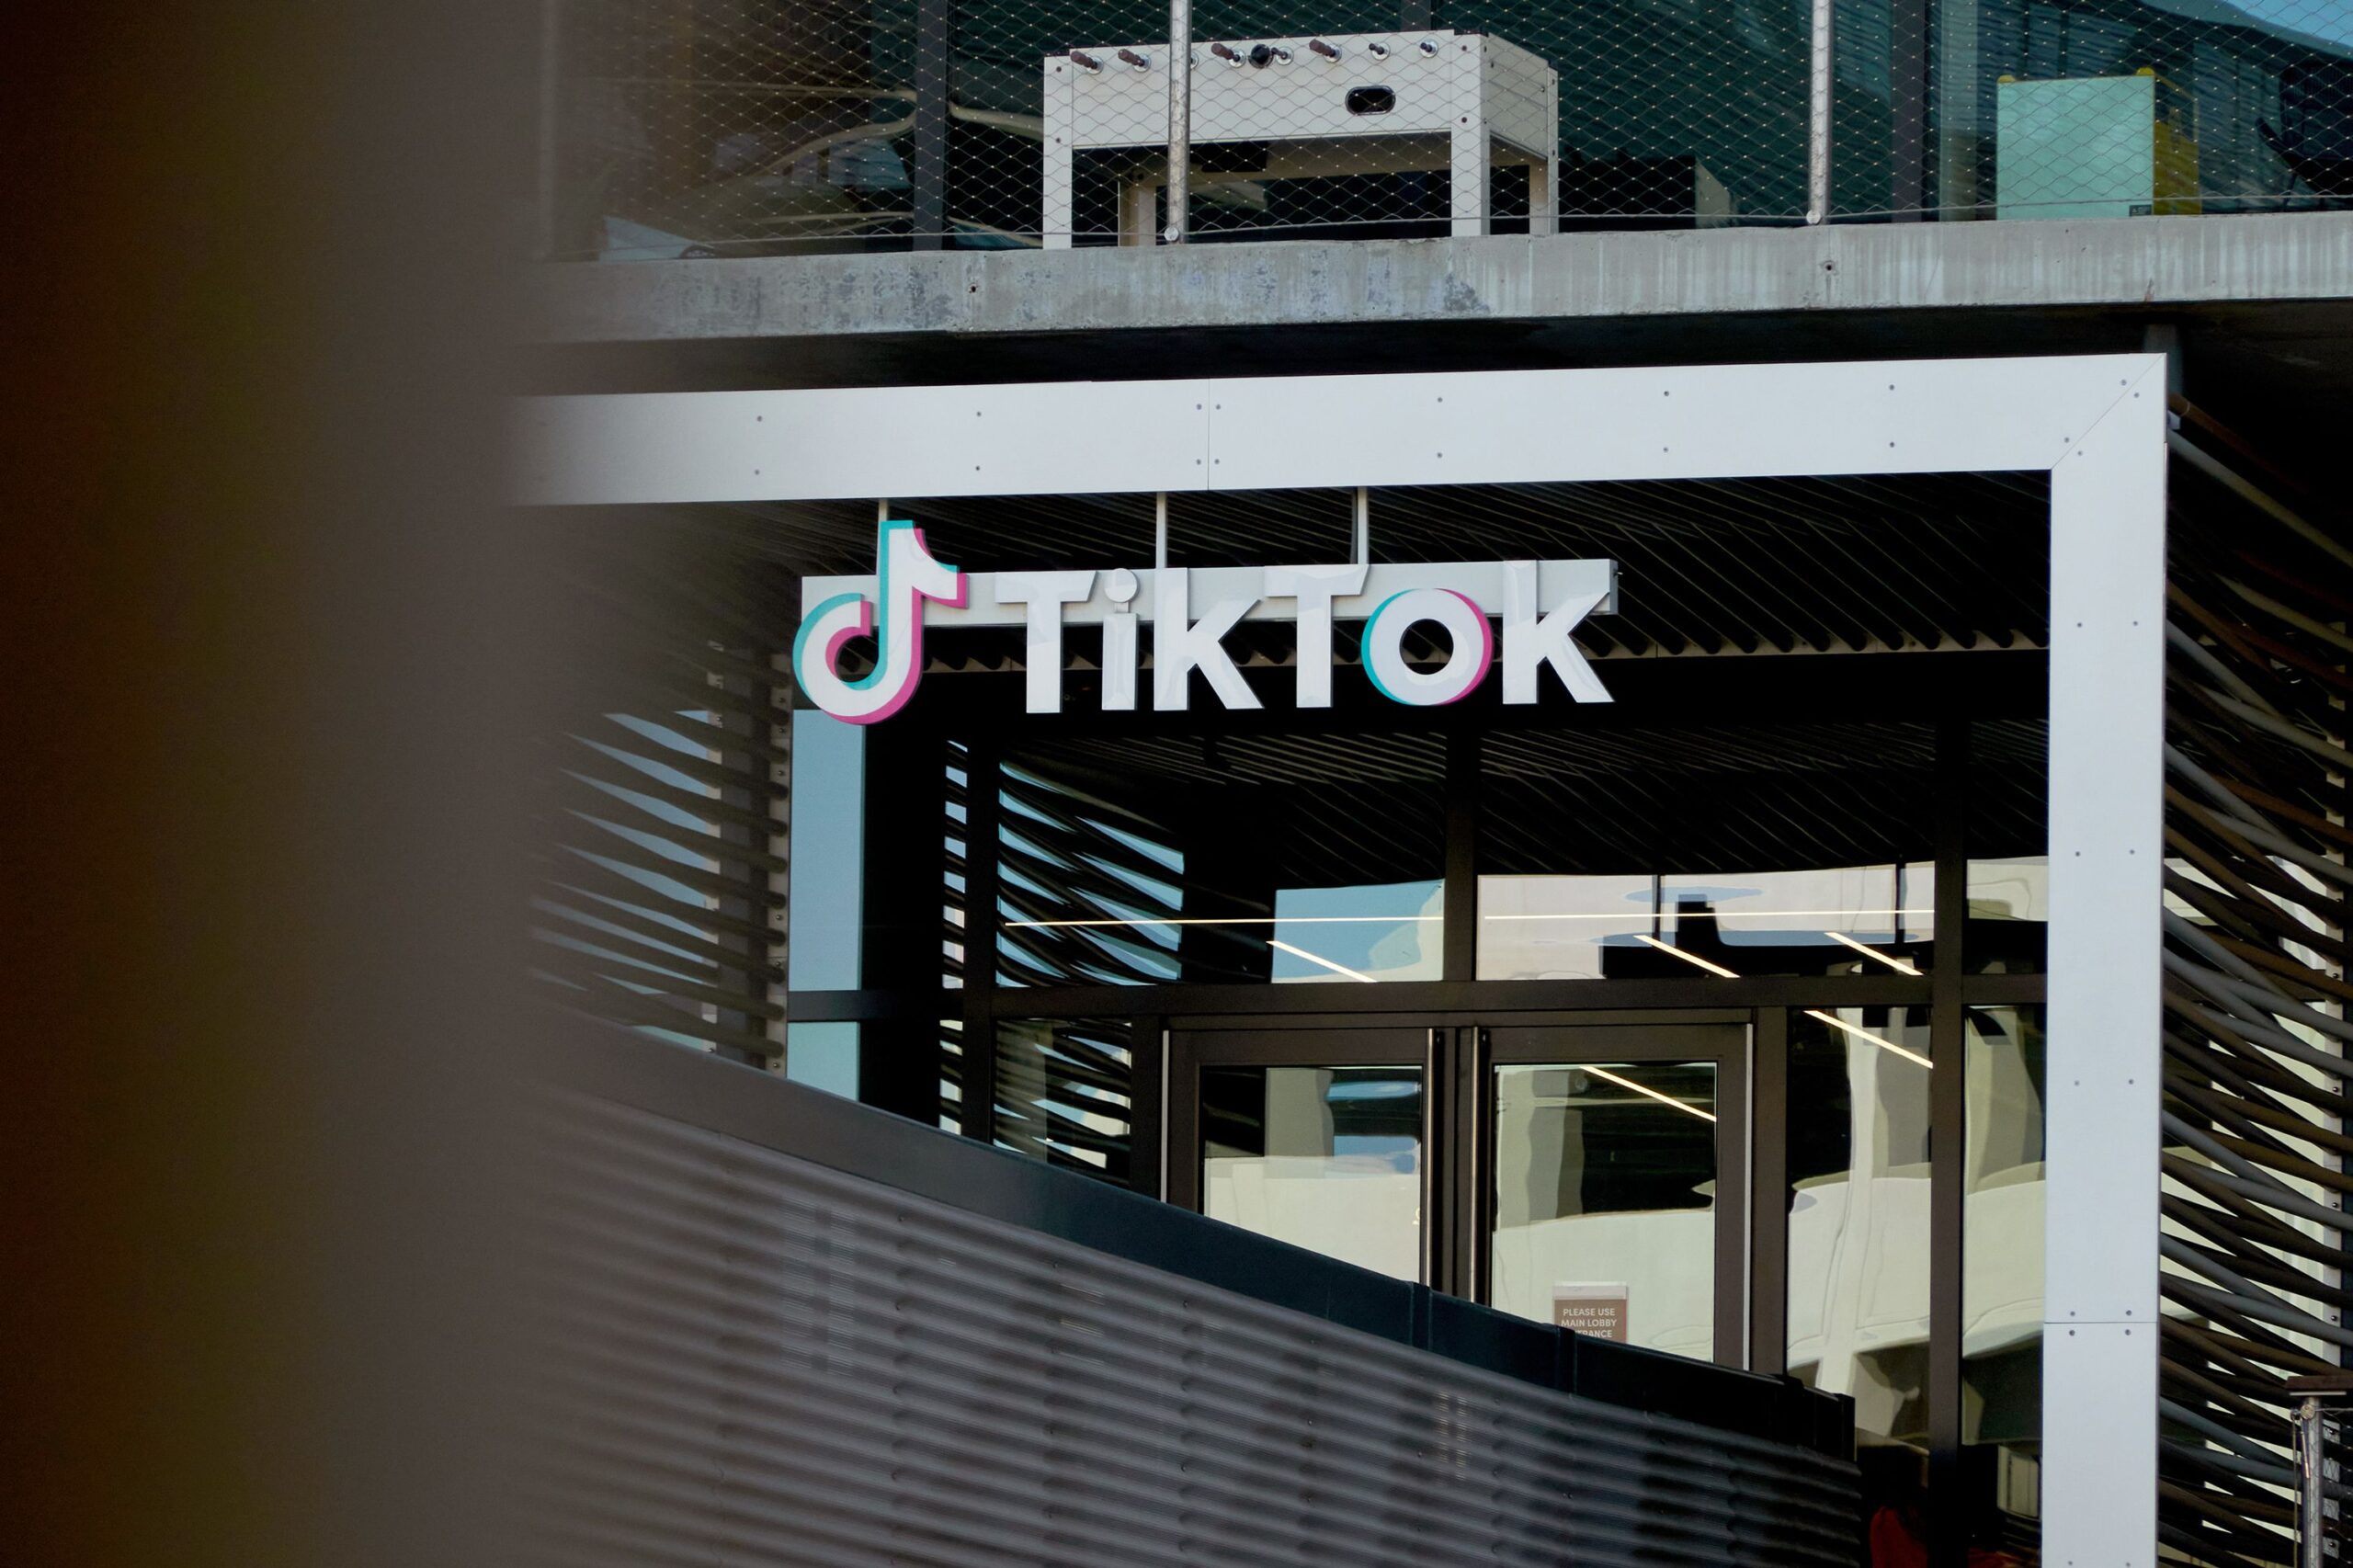 The Federal Trade Commission is investigating TikTok for its data and security practices, two sourc...